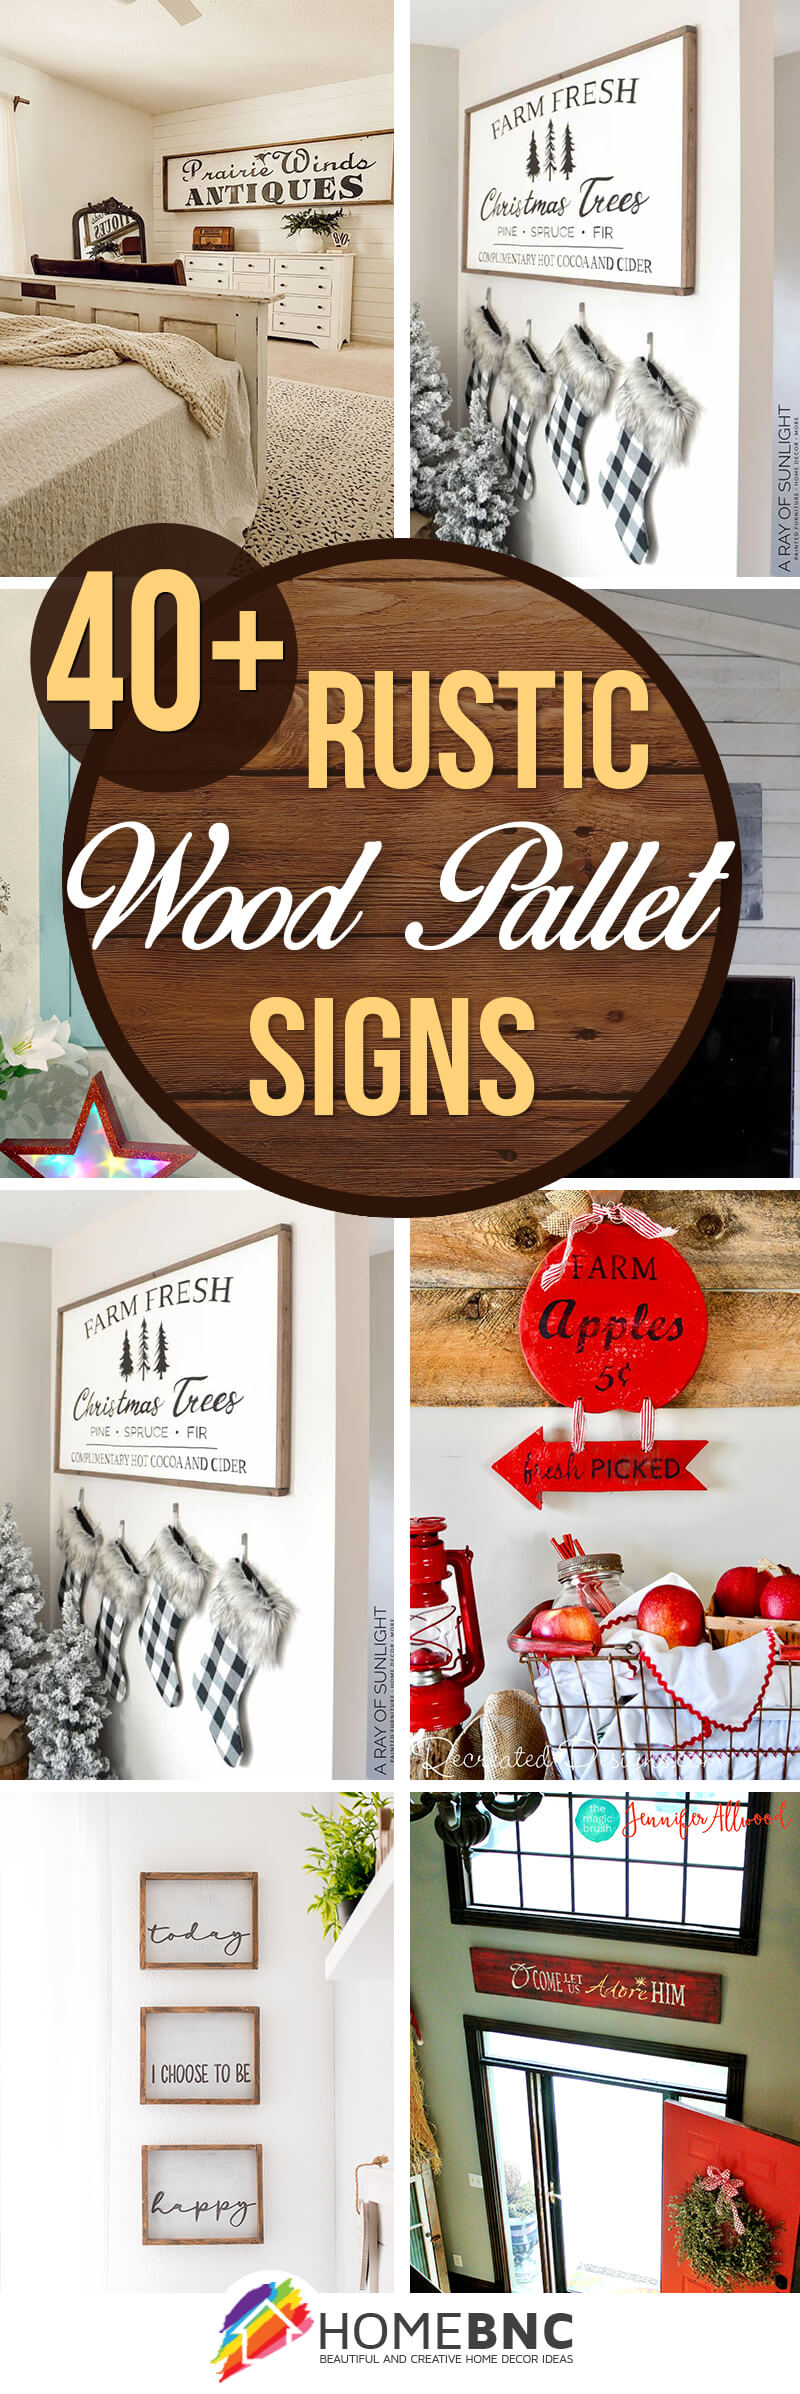 Wood Signs Ideas And Decorations